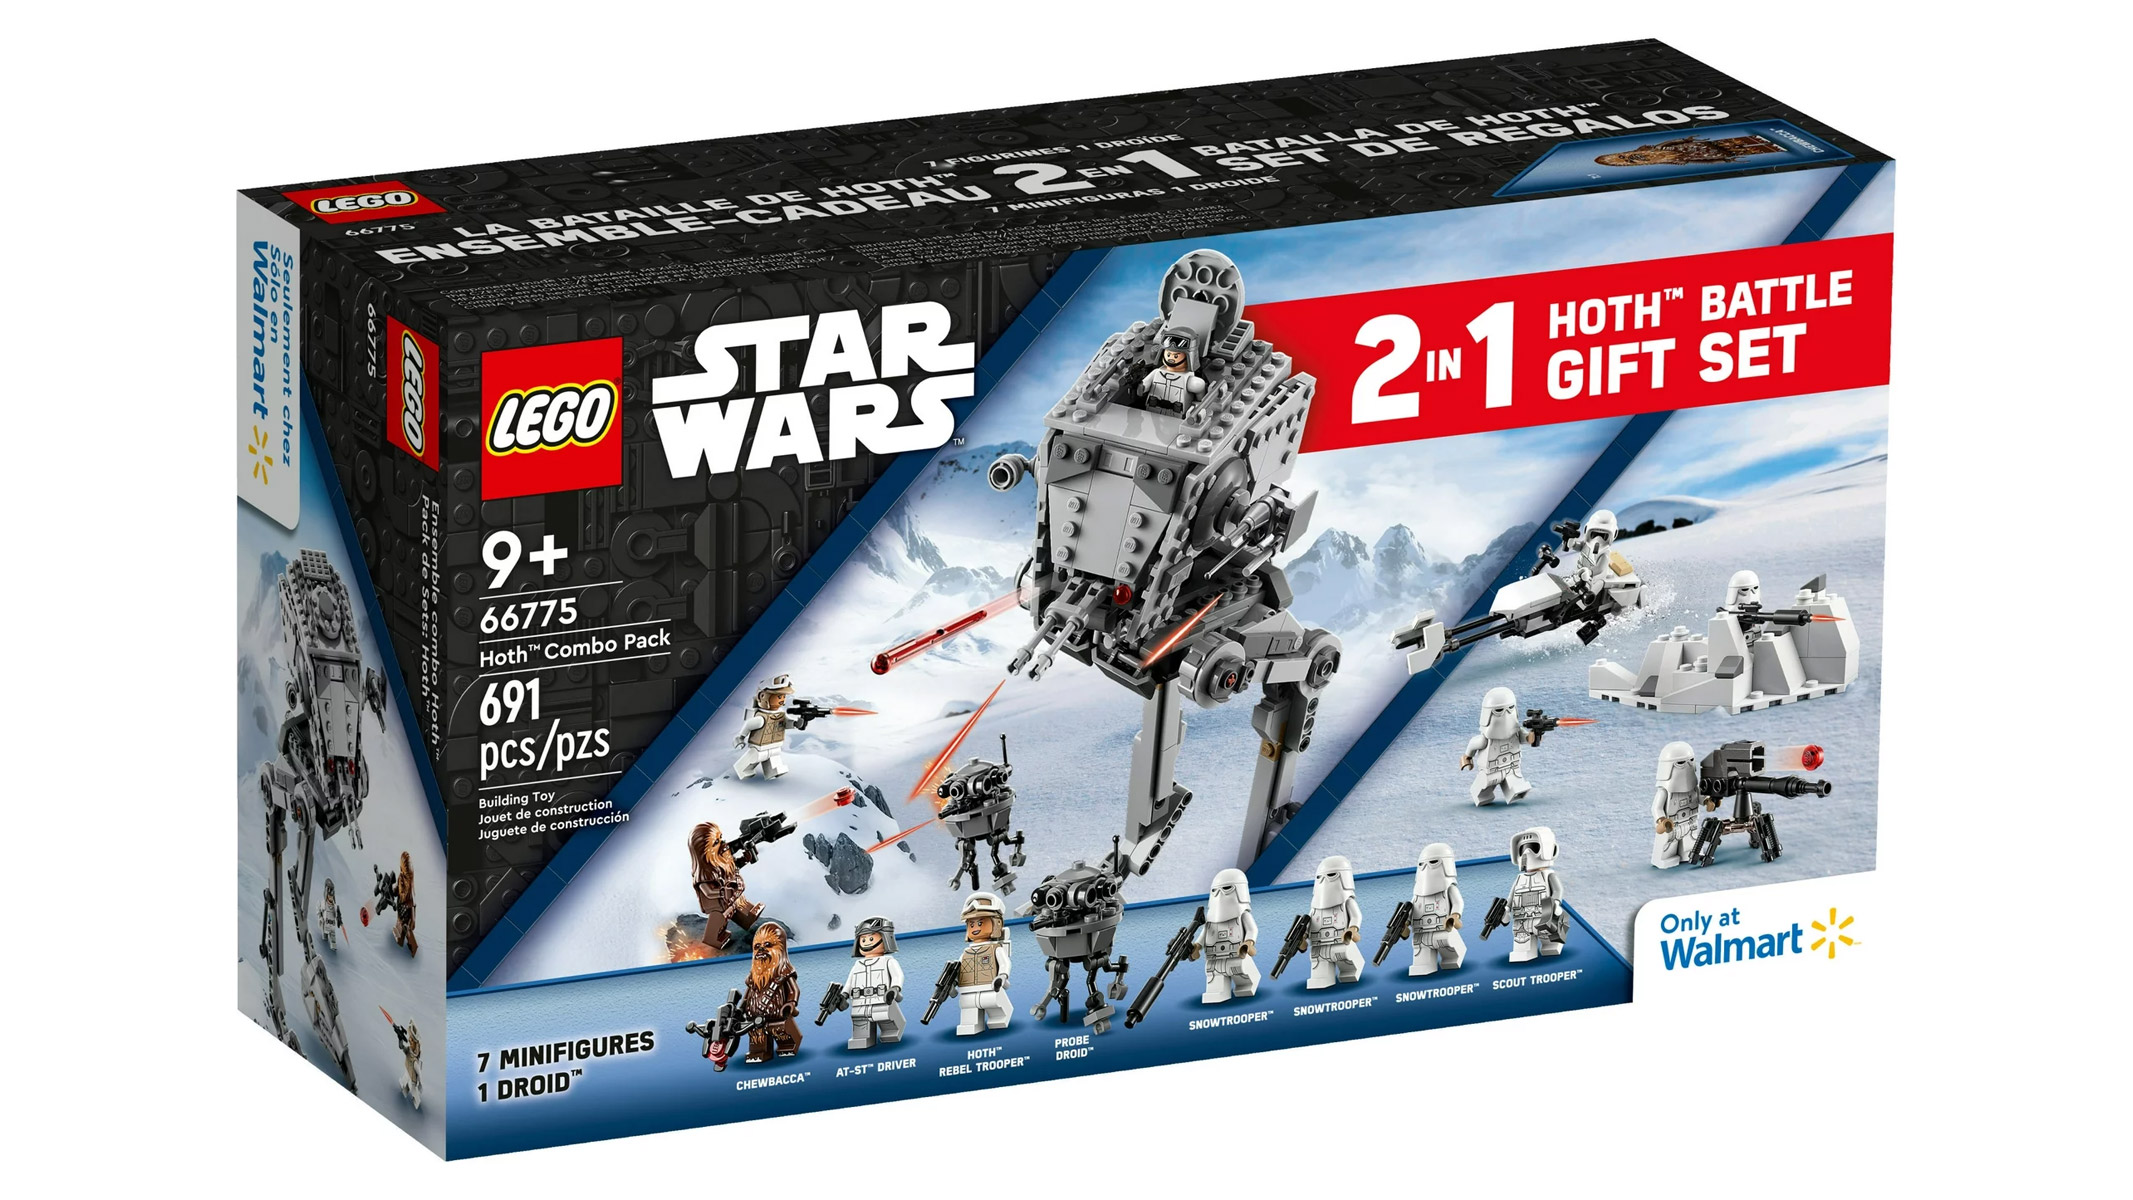 Early Black Friday Lego Star Wars deal: 35% off Hoth battle set Space